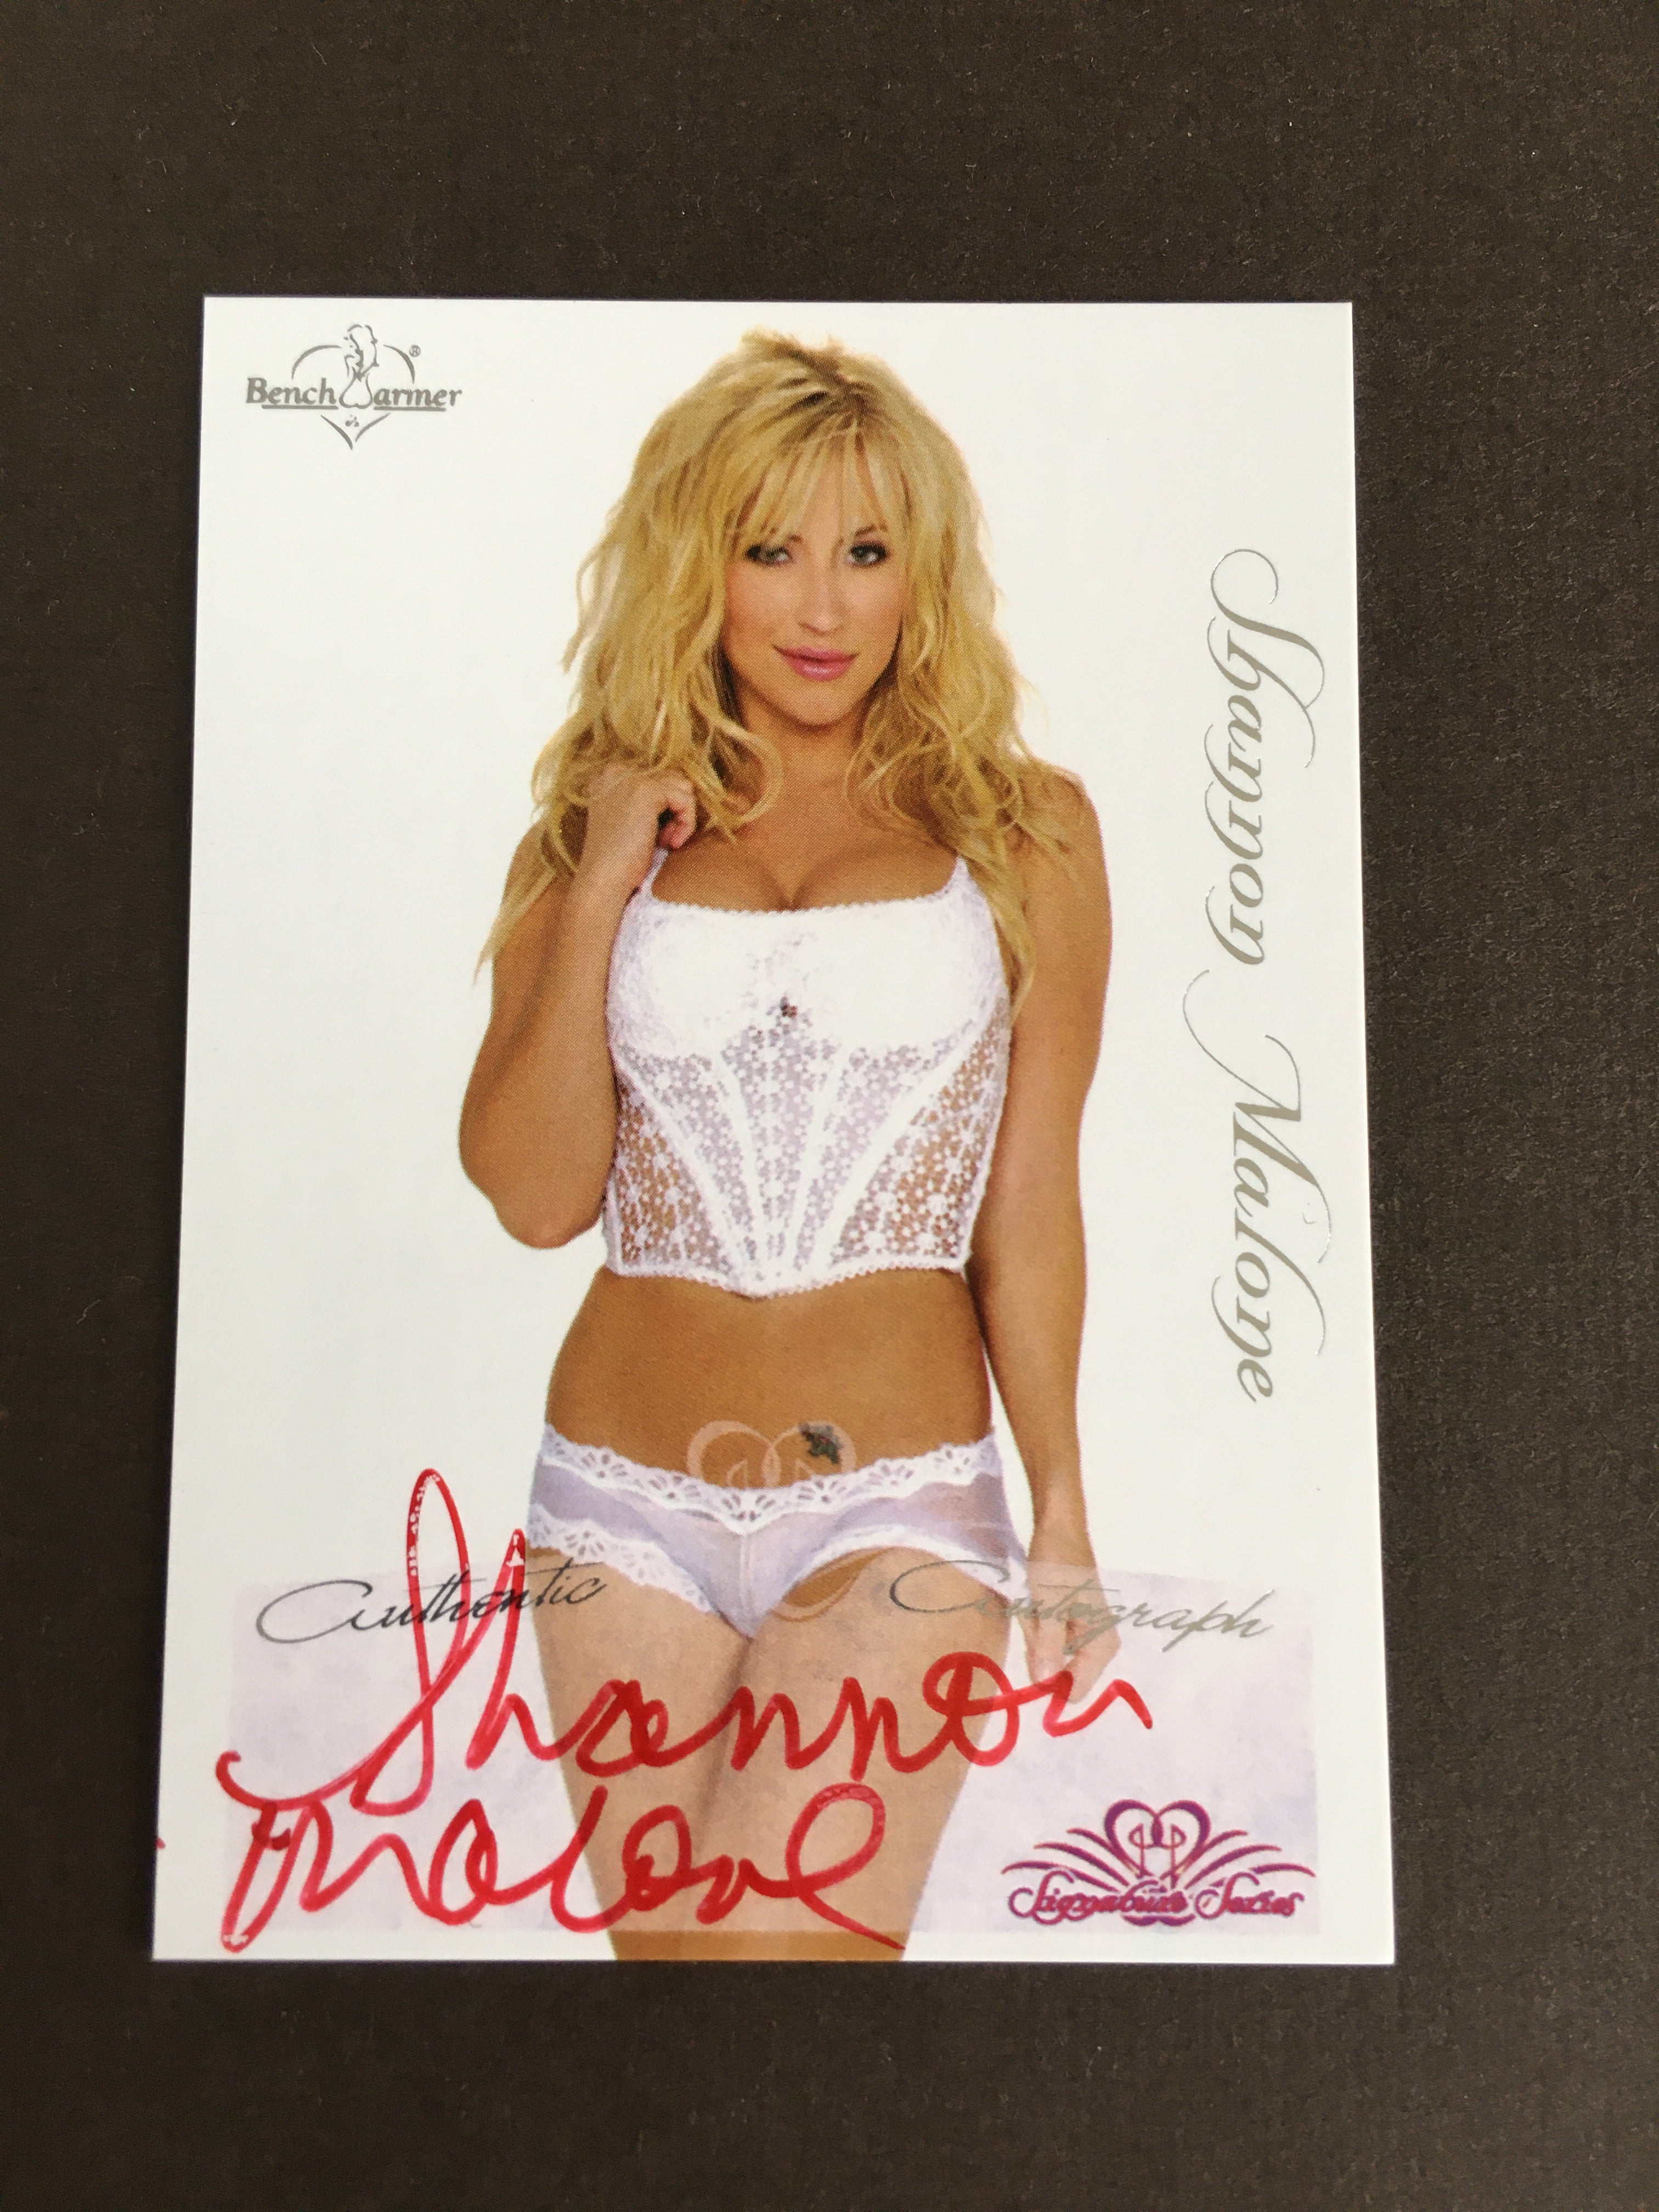 Shannon Malone - Autographed Benchwarmer Trading Card (1)